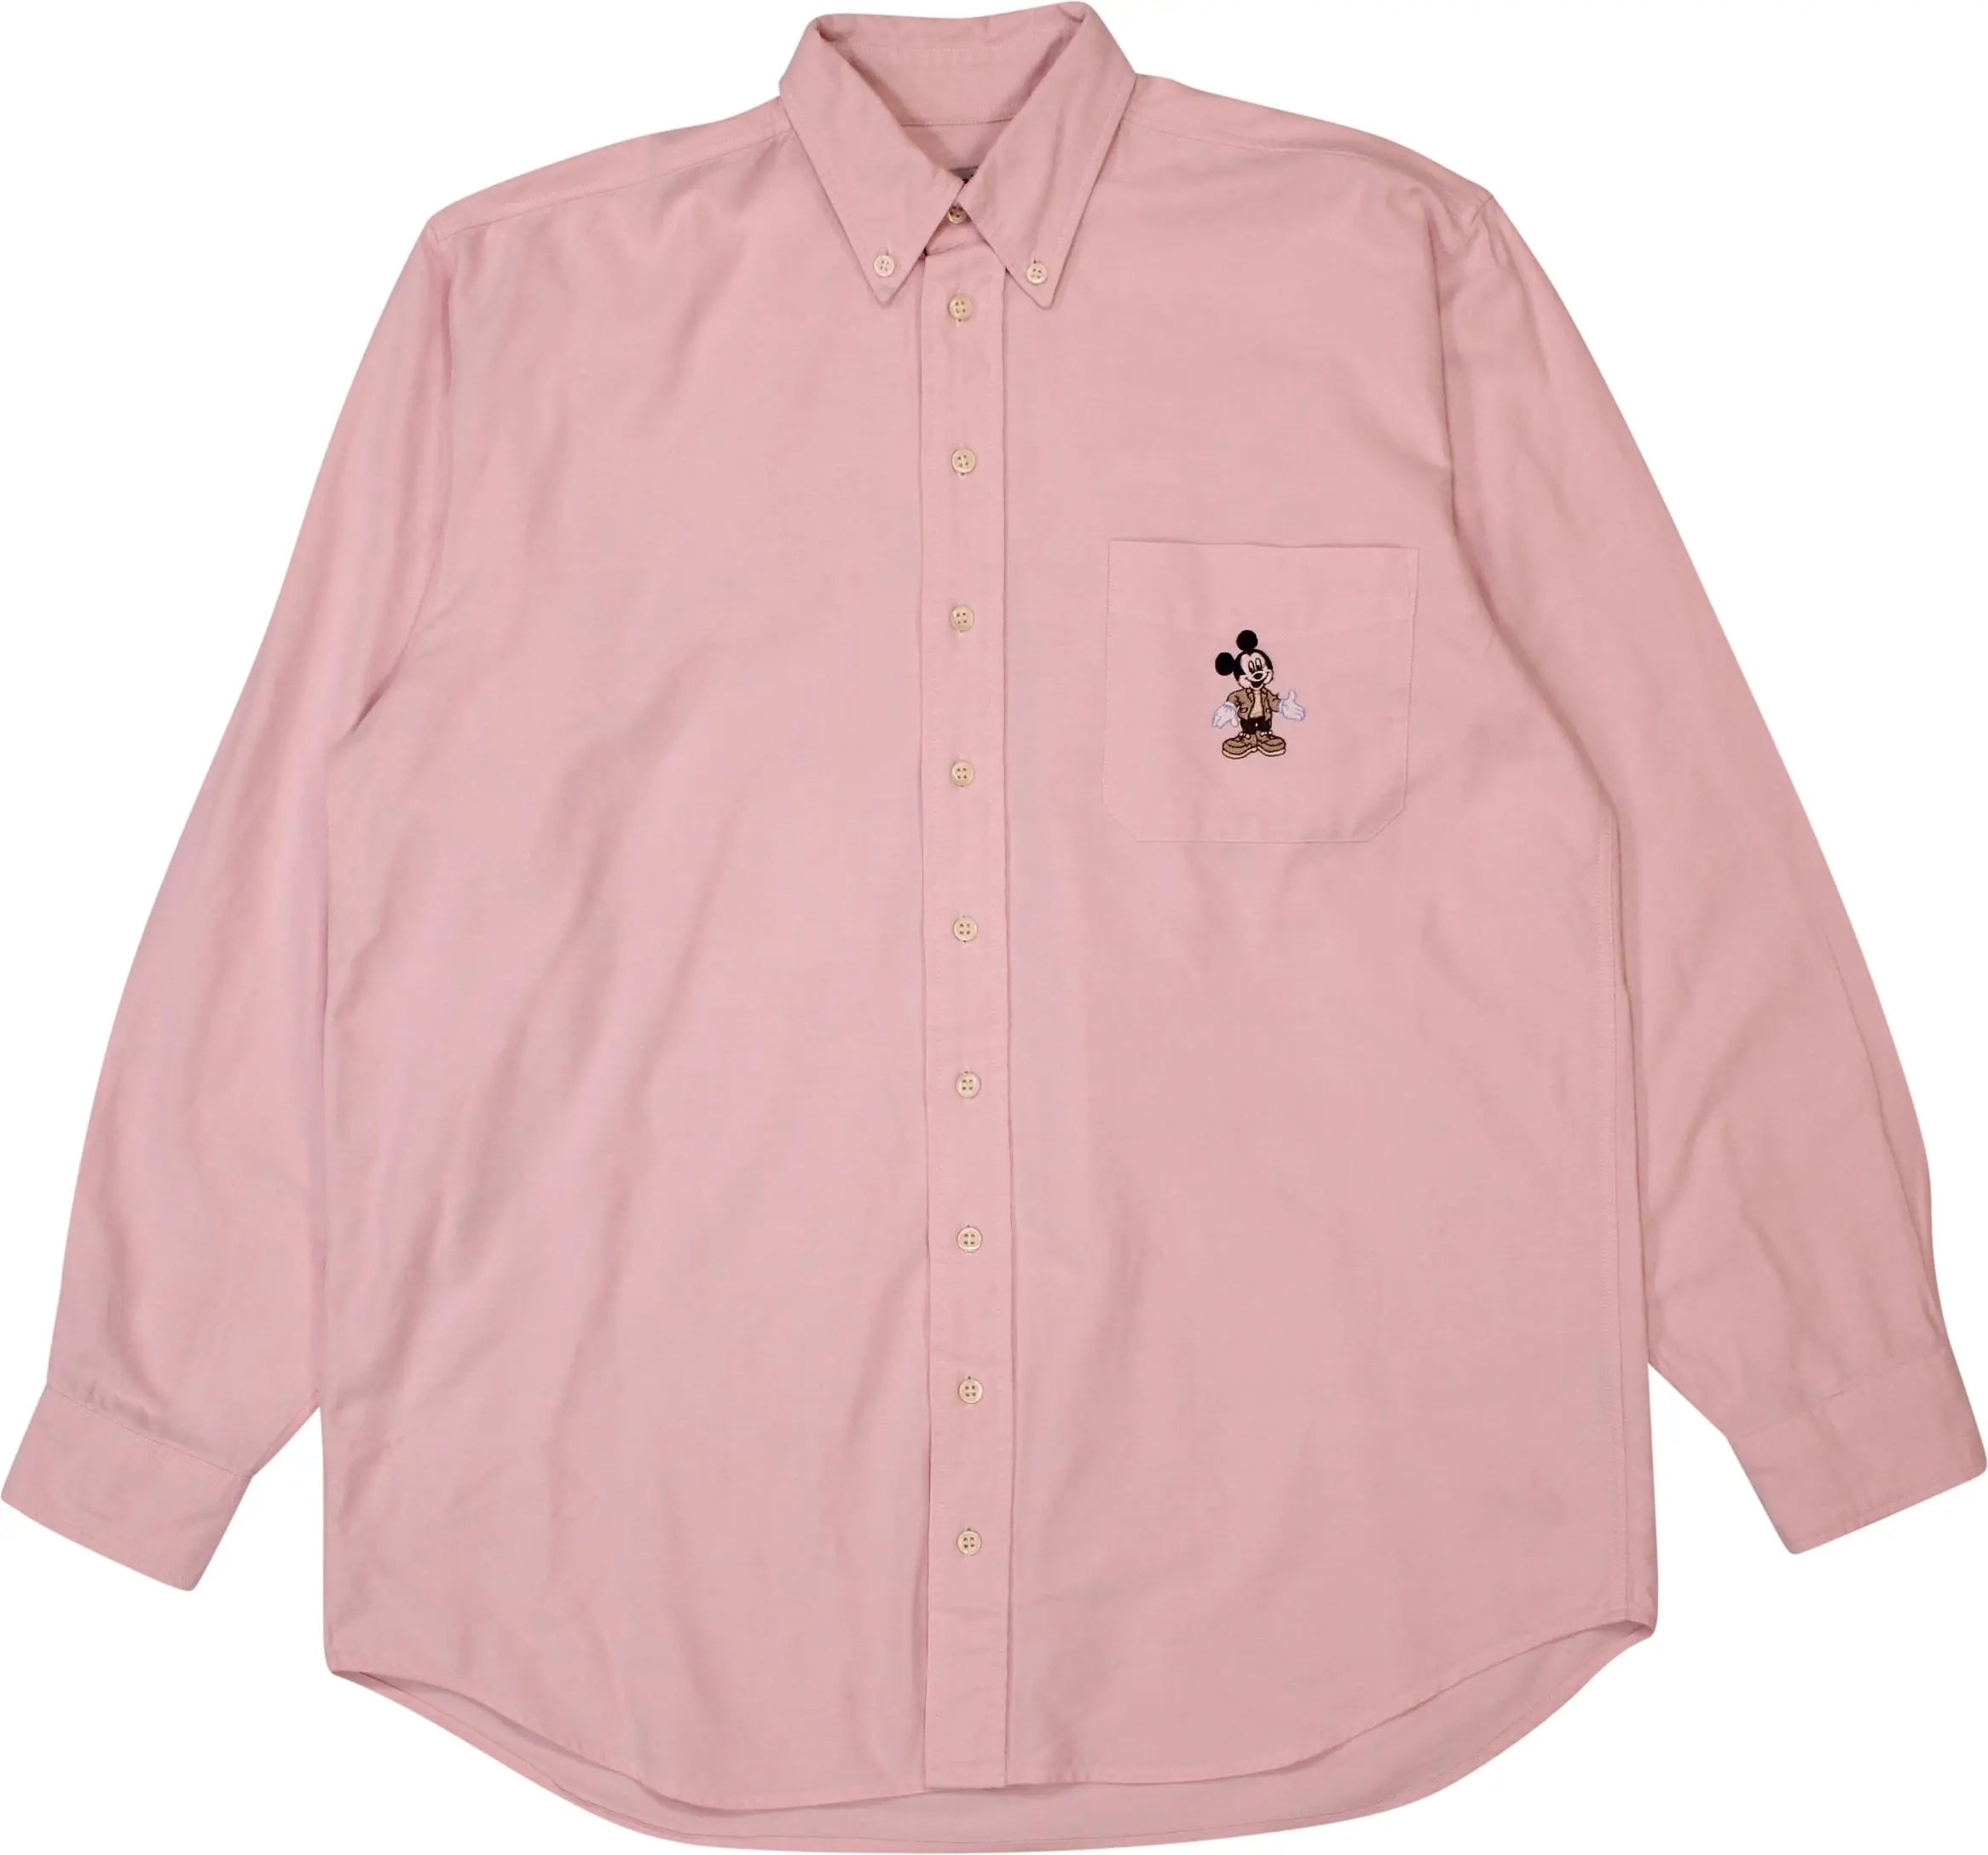 Donaldson - Vintage Pink Shirt by Donaldson Walt Disney Company- ThriftTale.com - Vintage and second handclothing